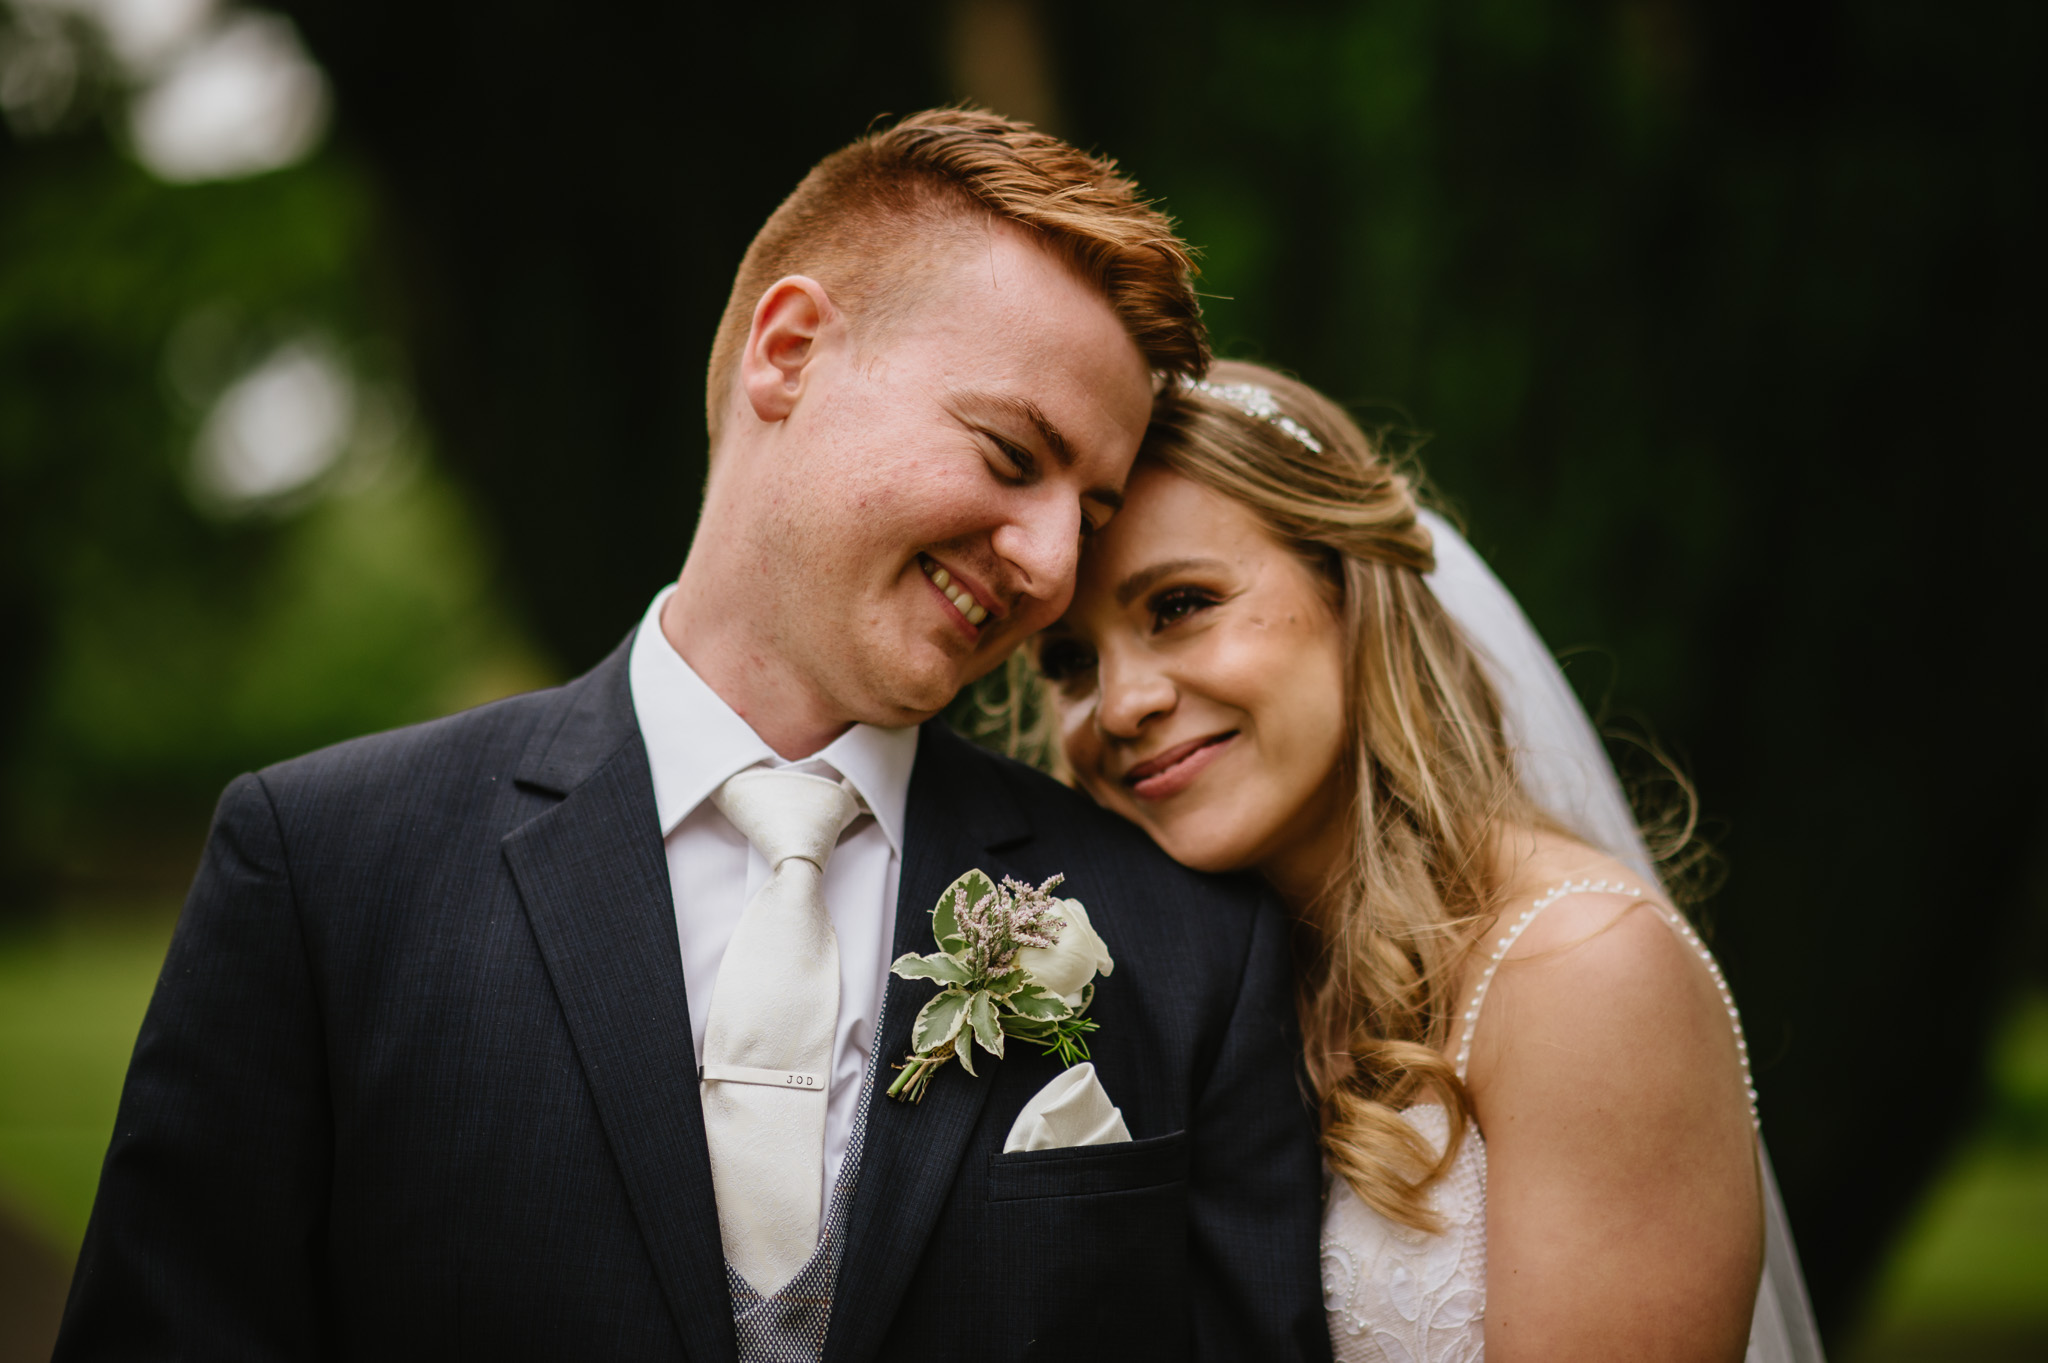 Bride and groom smiling at each other on their wedding day in Ireland.